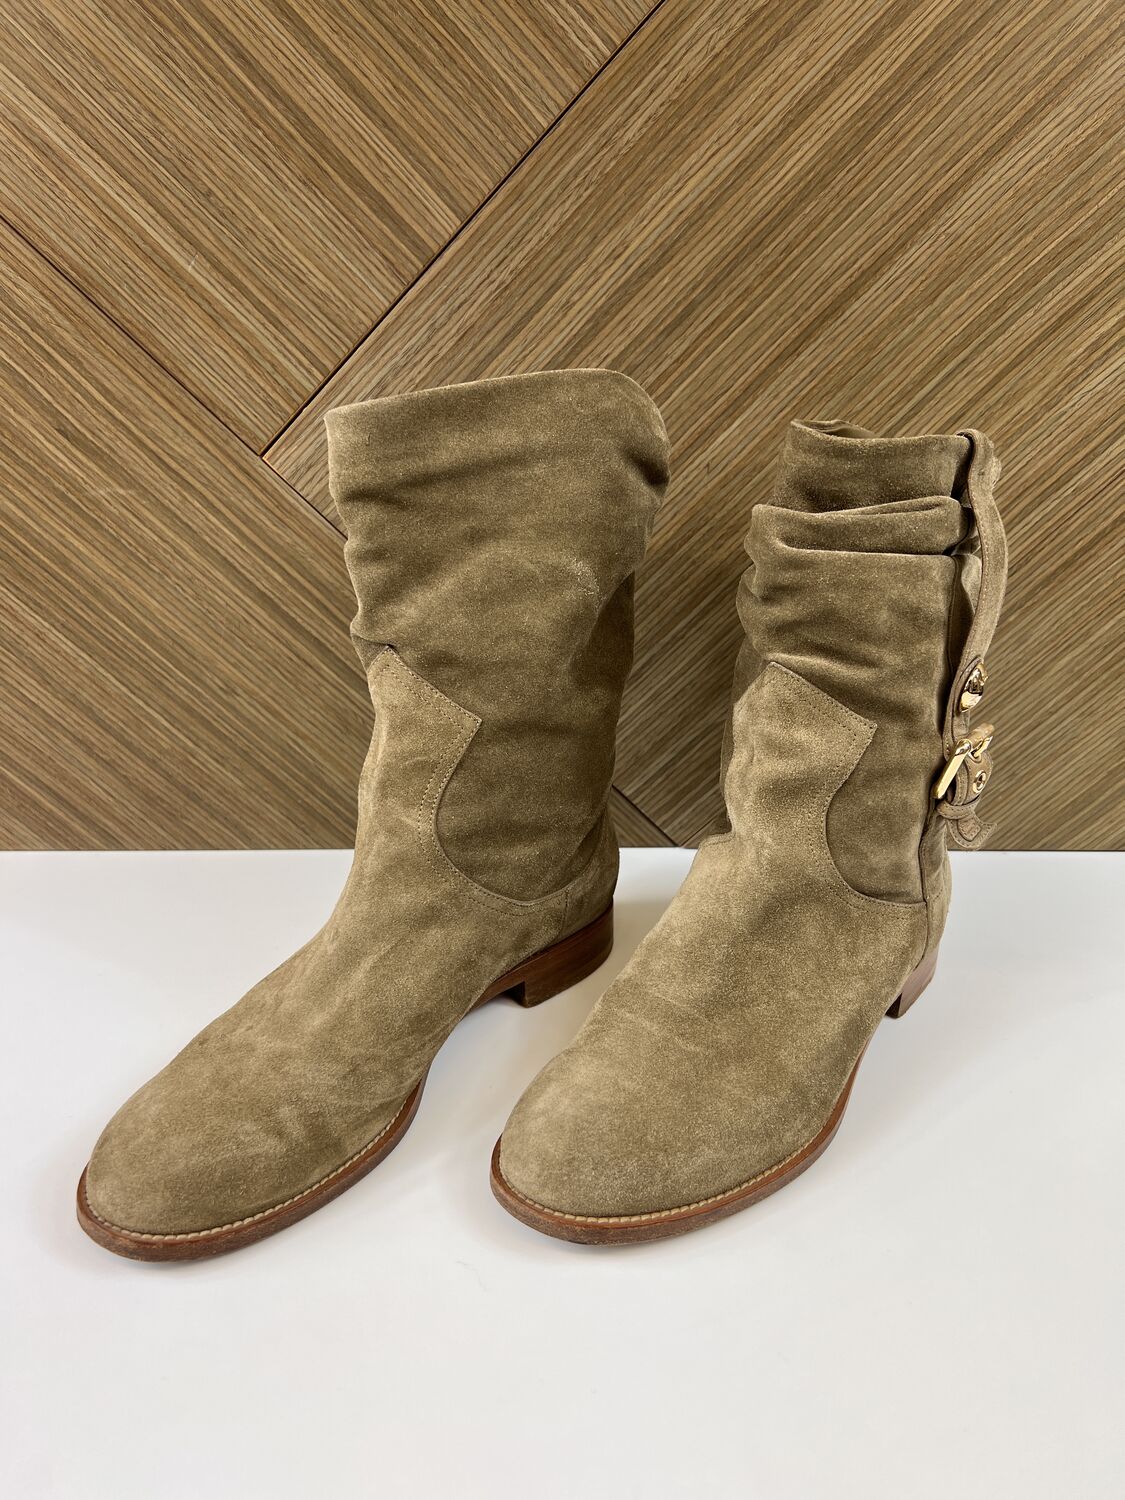 Safari Beige Suede Ankle Boots Louis Vuitton  39 buy preowned at 120 EUR